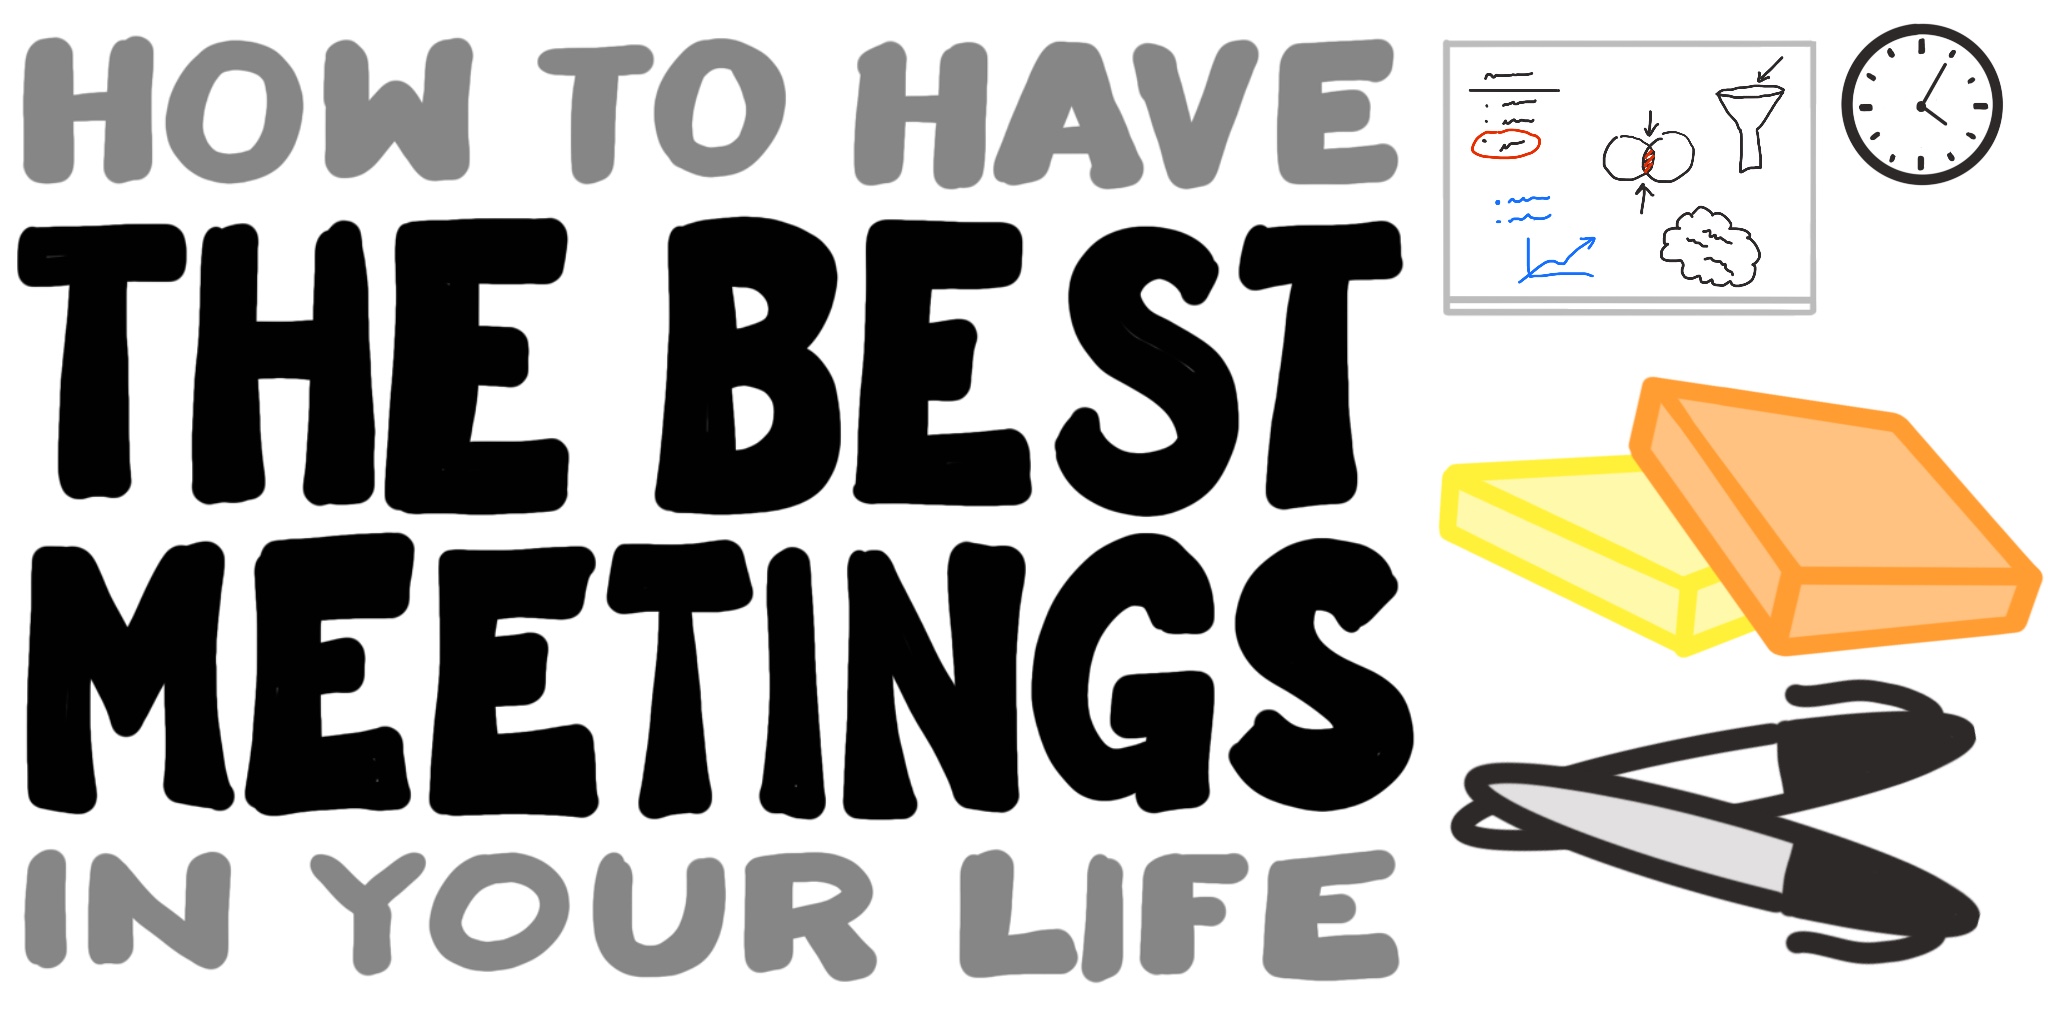 How to Have the Best Meetings in Your Life